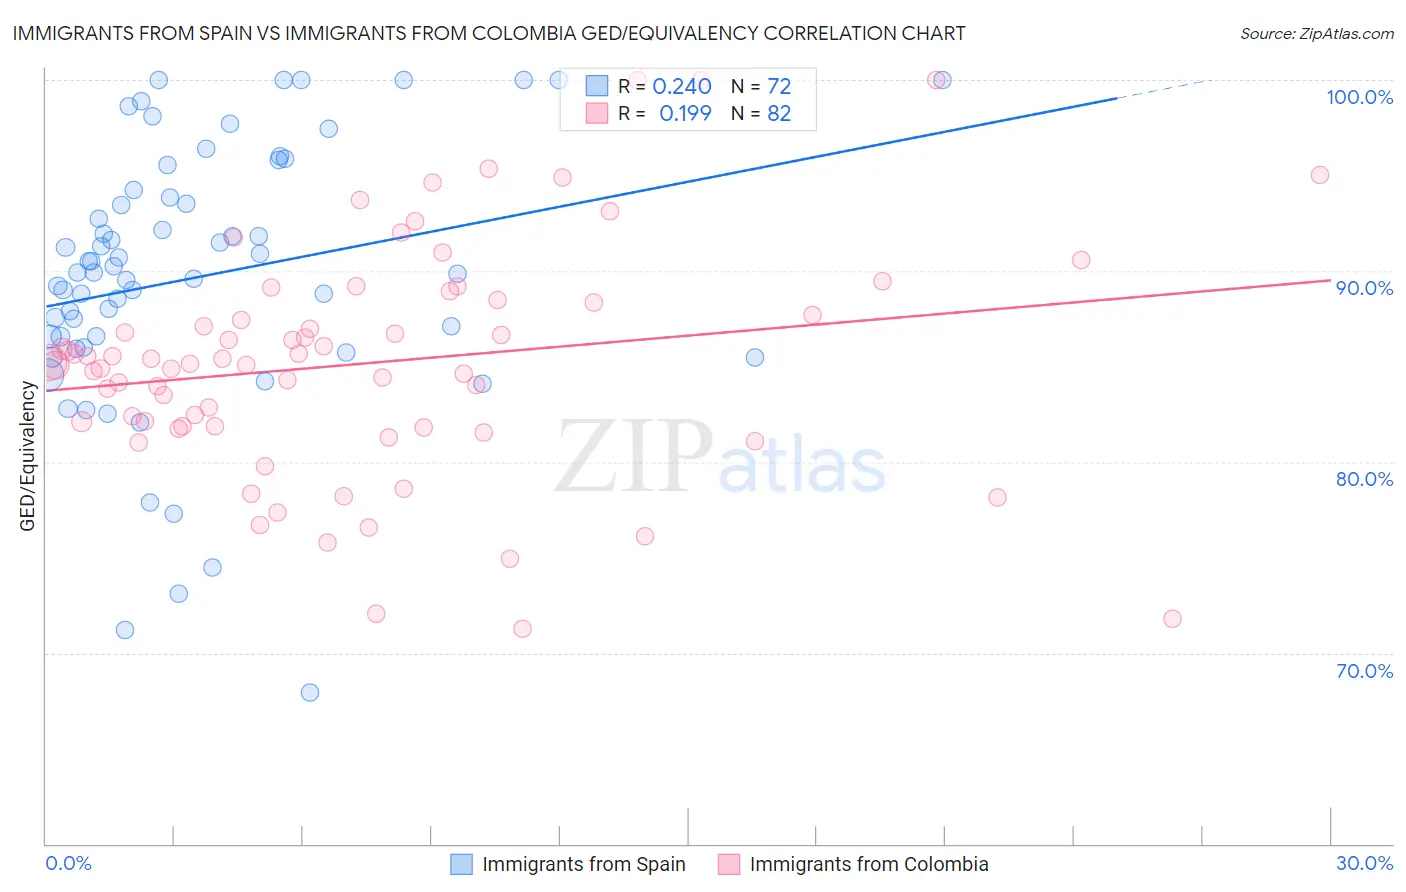 Immigrants from Spain vs Immigrants from Colombia GED/Equivalency